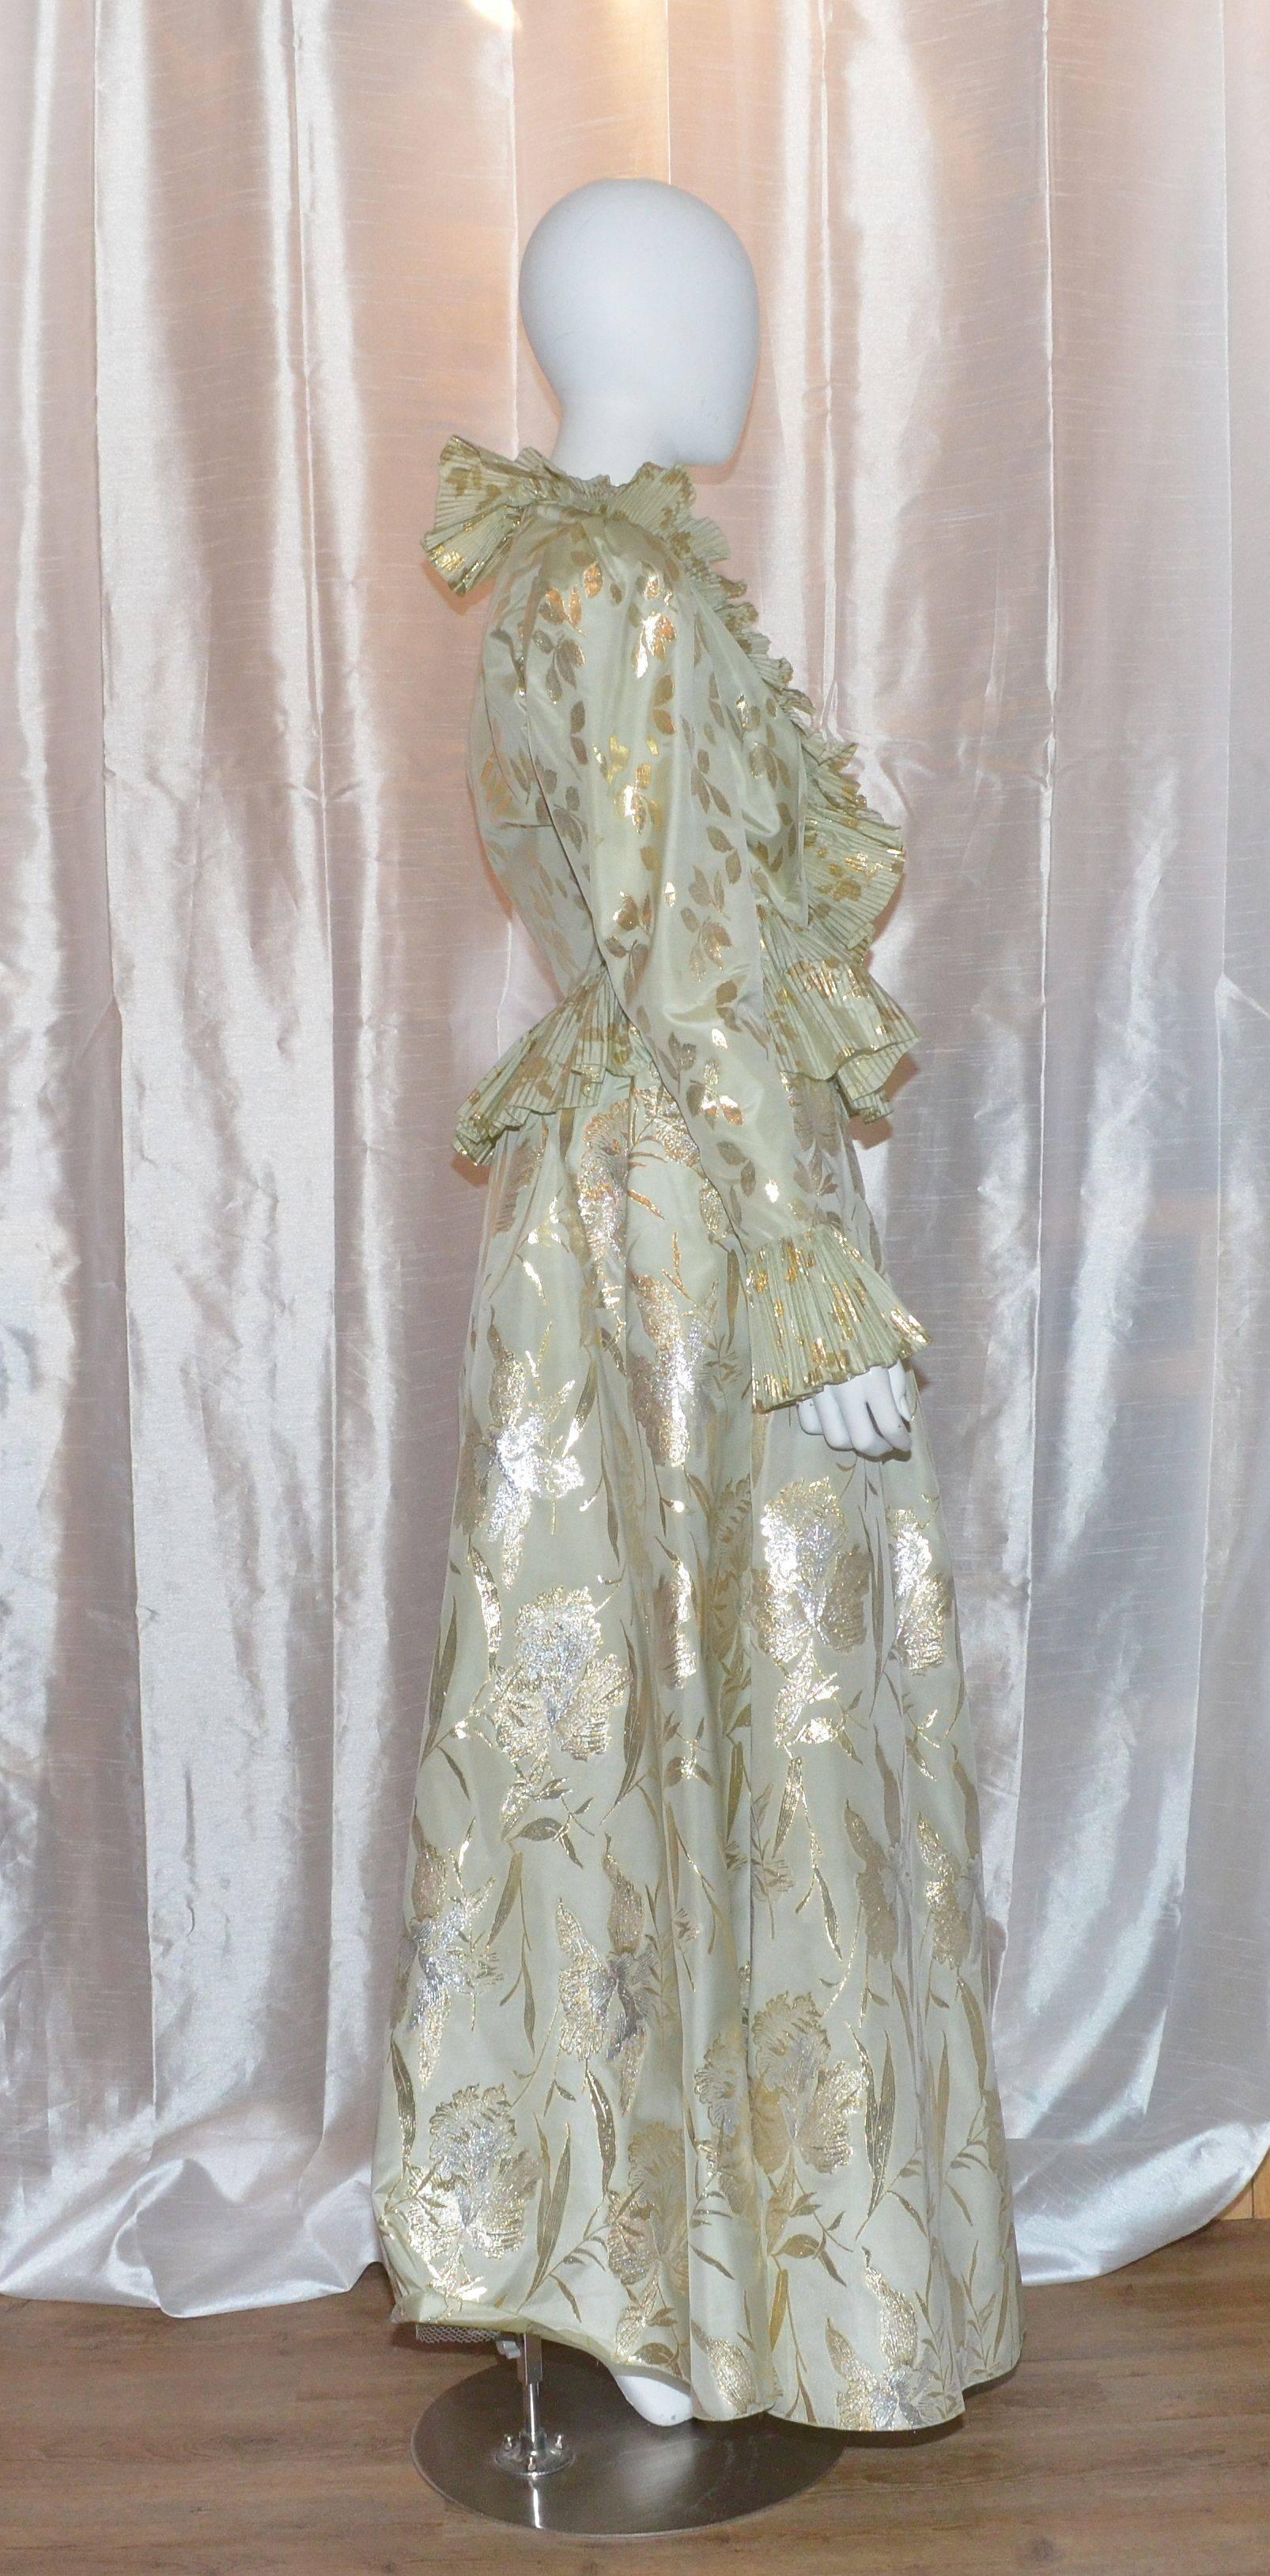 Oscar de la Renta Lame Vintage Taffeta Ball Skirt & Pleated Jacket 

High Drama from Oscar de la Renta in a featherweight silk brocade.  Skirt set is featured in a soft green shade with a subtle gold lame floral pattern throughout. Blouse has a